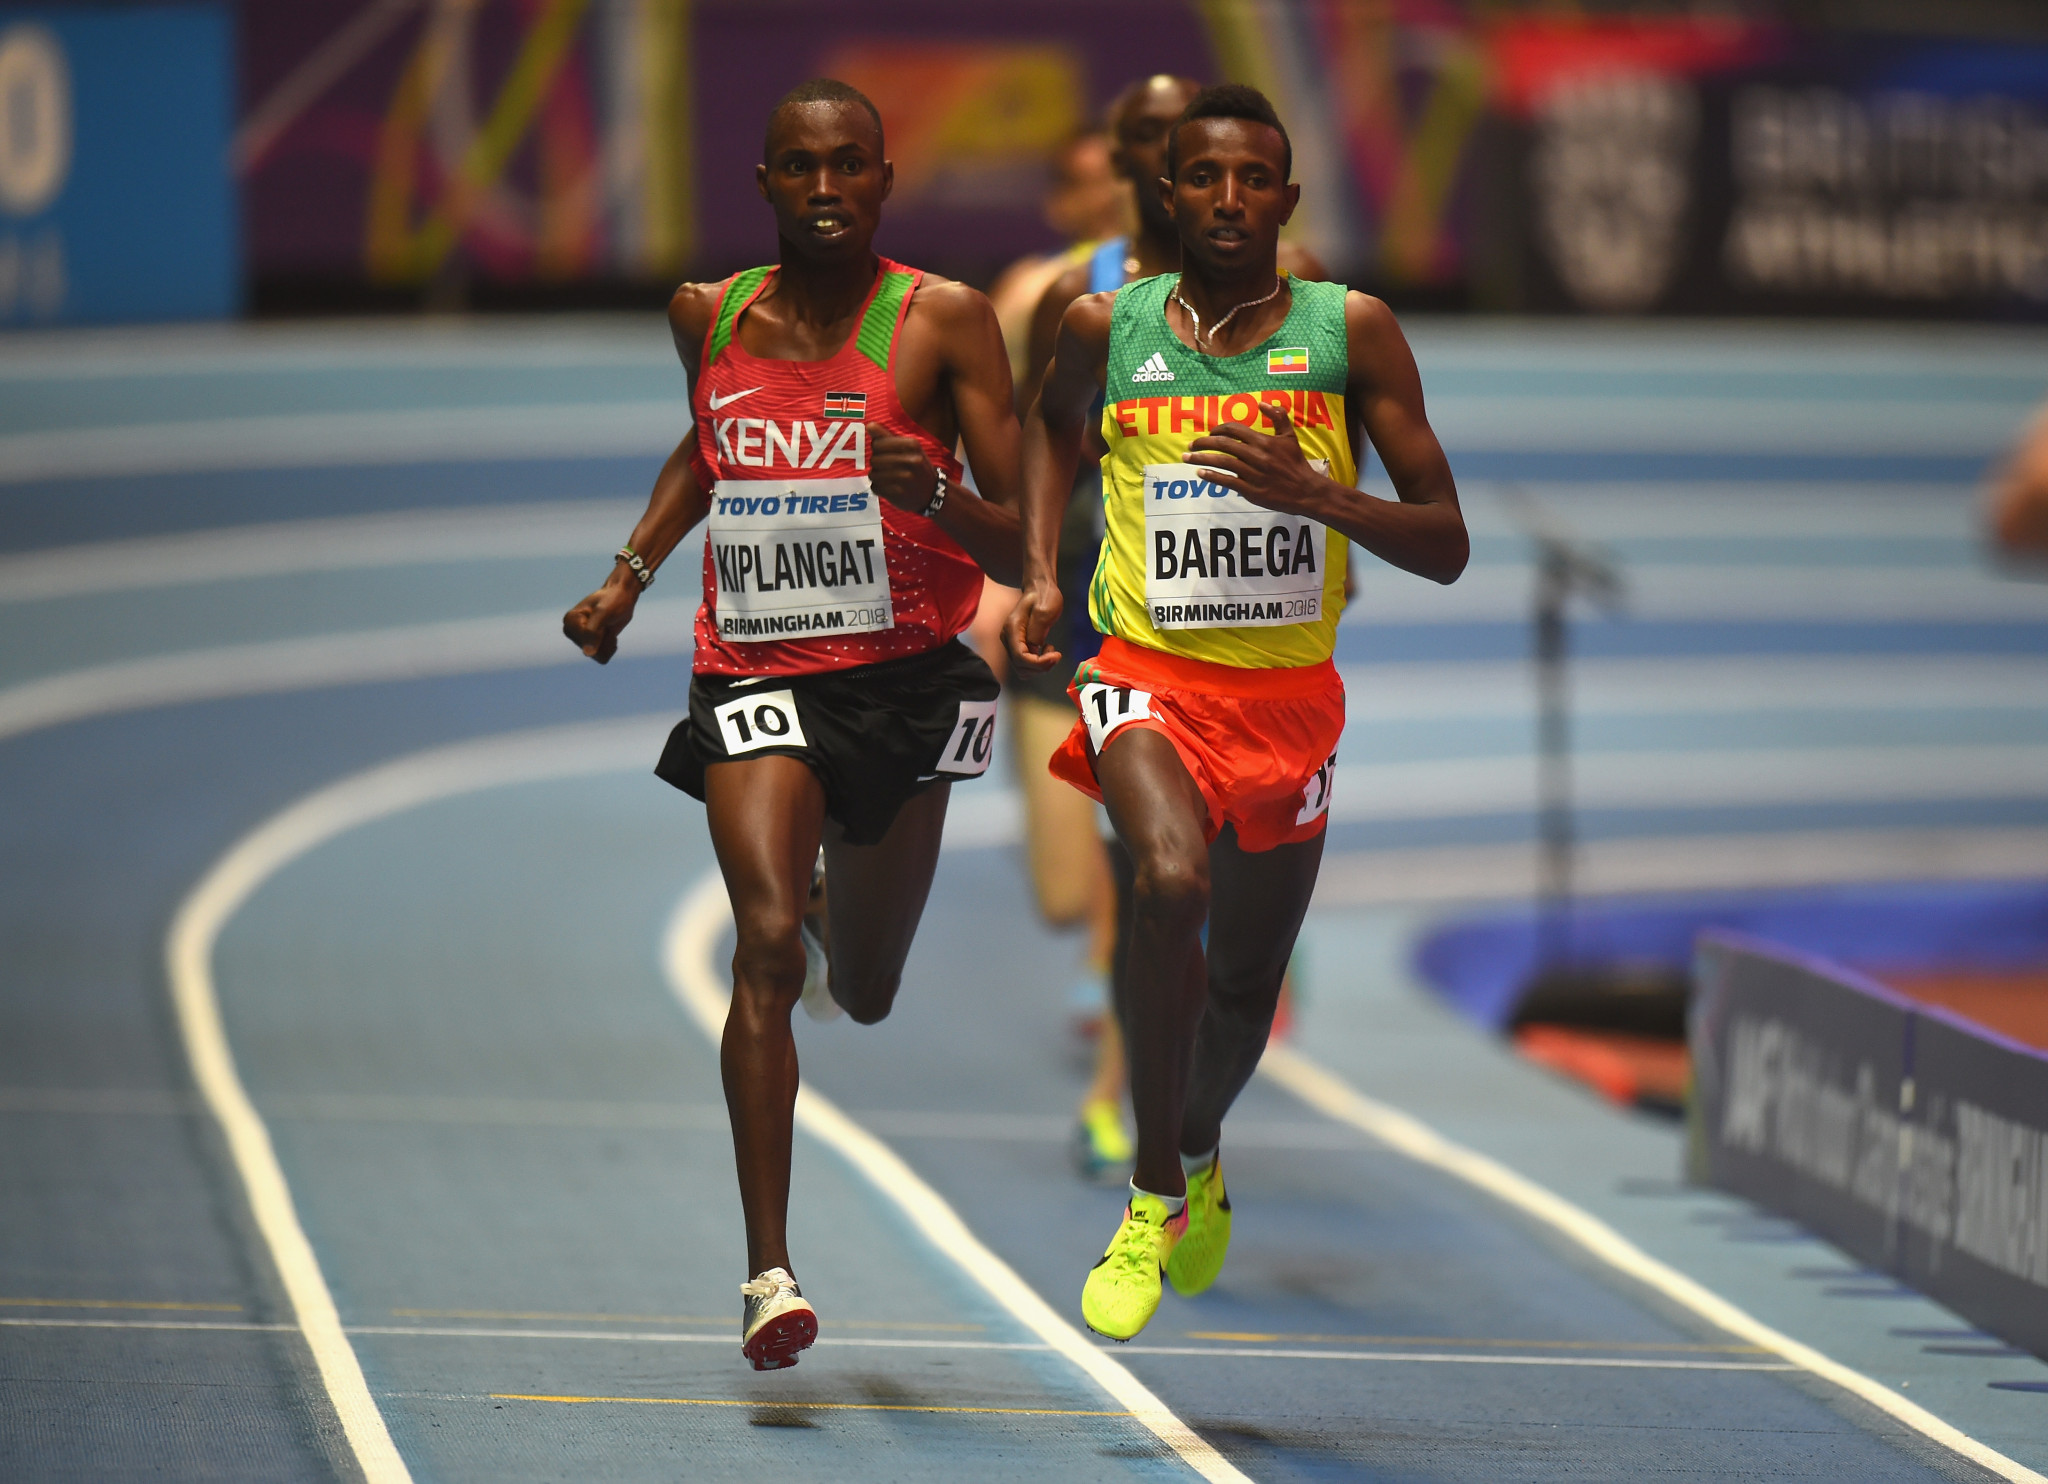 New generation of rising stars hoping to emerge at IAAF World Under-20